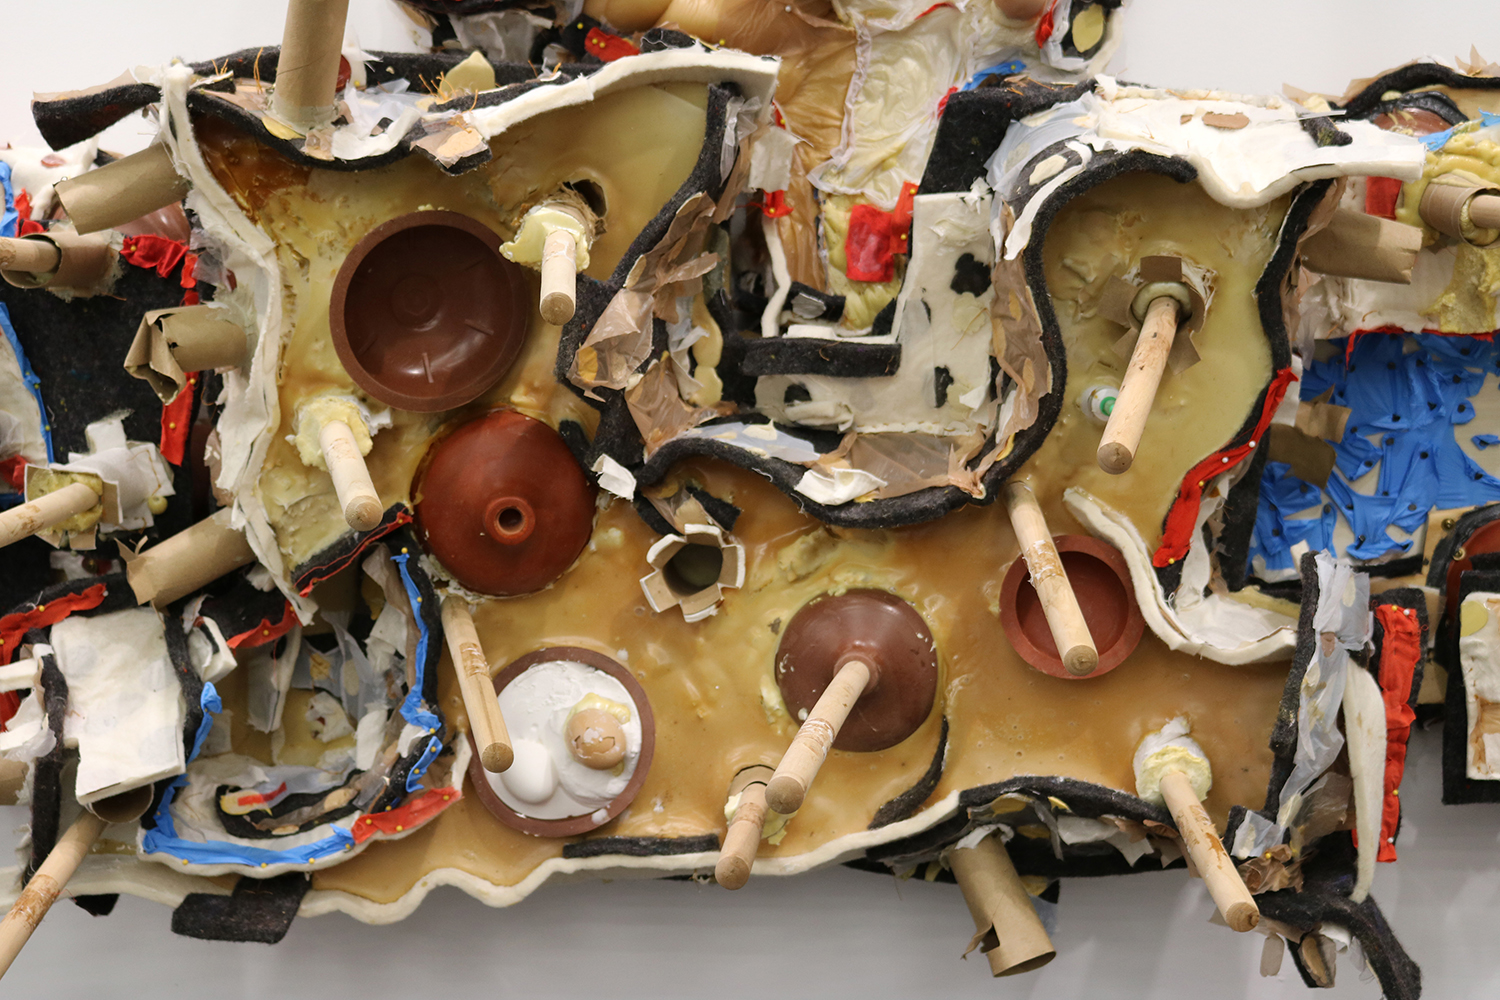 A detail shot of a large, densely packed wall sculpture. This imade shows a funky organic shape containing toilet plungers emerging from and sinking into a pool of latex rubber. One of the toiler plunger heads is filled with plaster and different colored eggshells. Spent toilet paper rolls create decorative orifices in the latex rubber mass, and hints of a harsh electric blue color are created with collaged nitrile medical gloves.